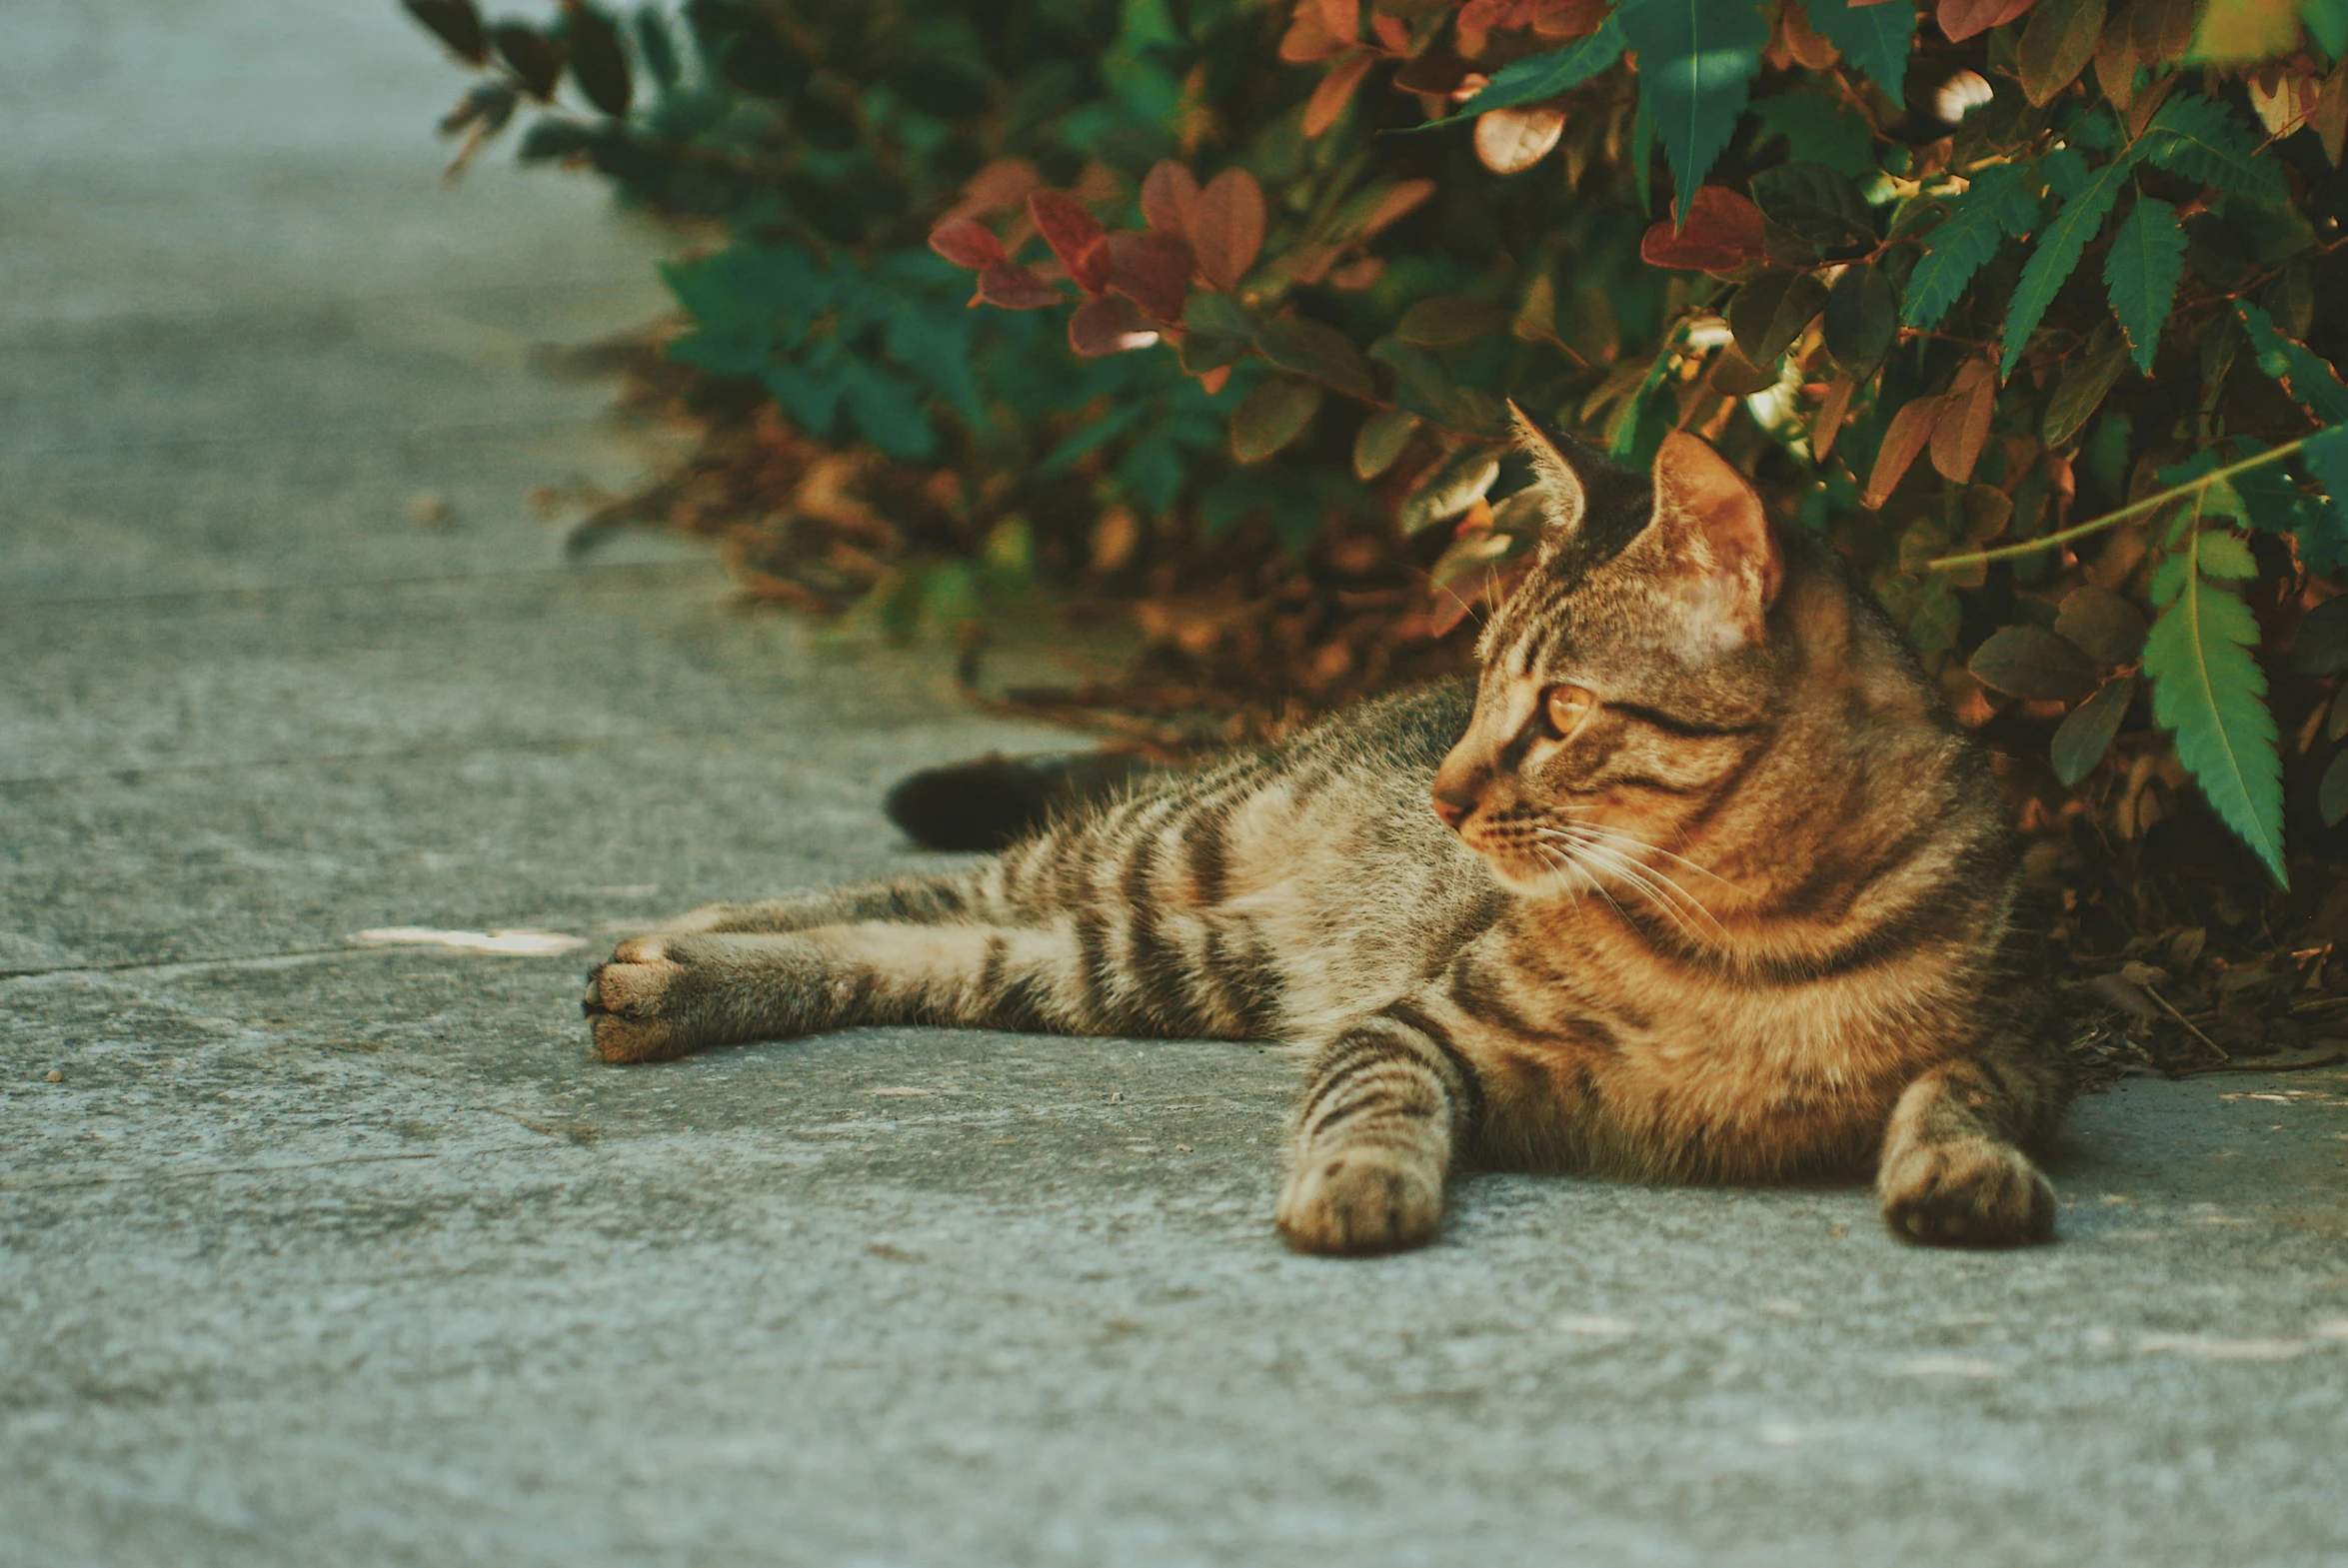 a cat lying on the ground near some bushes